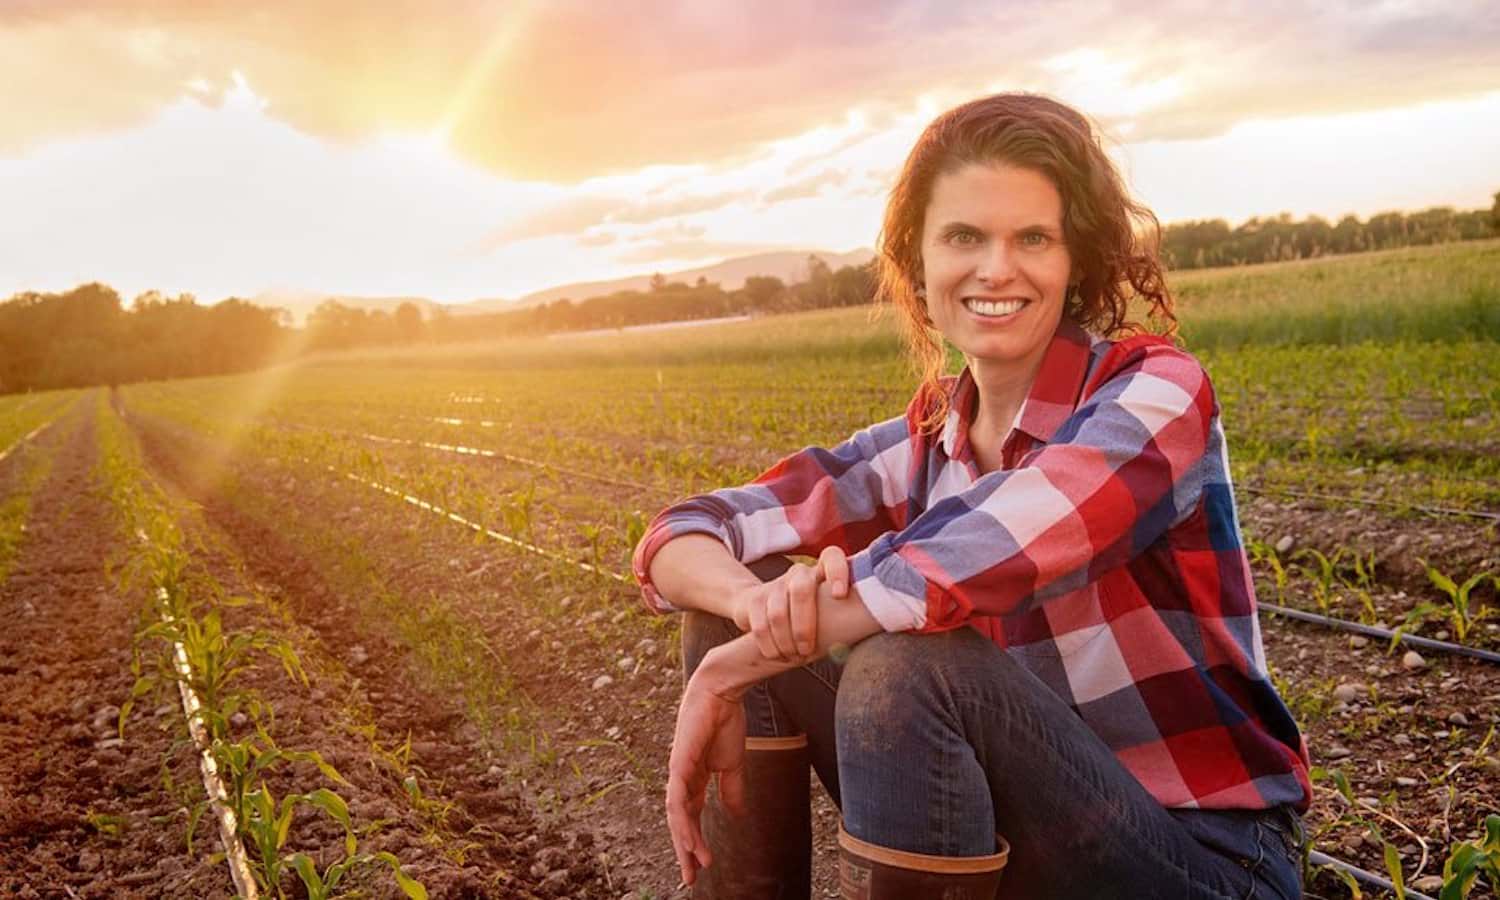 Lindsey Lusher Shute, Executive Director and co-founder of the National Young Farmers Coalition, talks about the support young farmers deserve from Congress and the public.